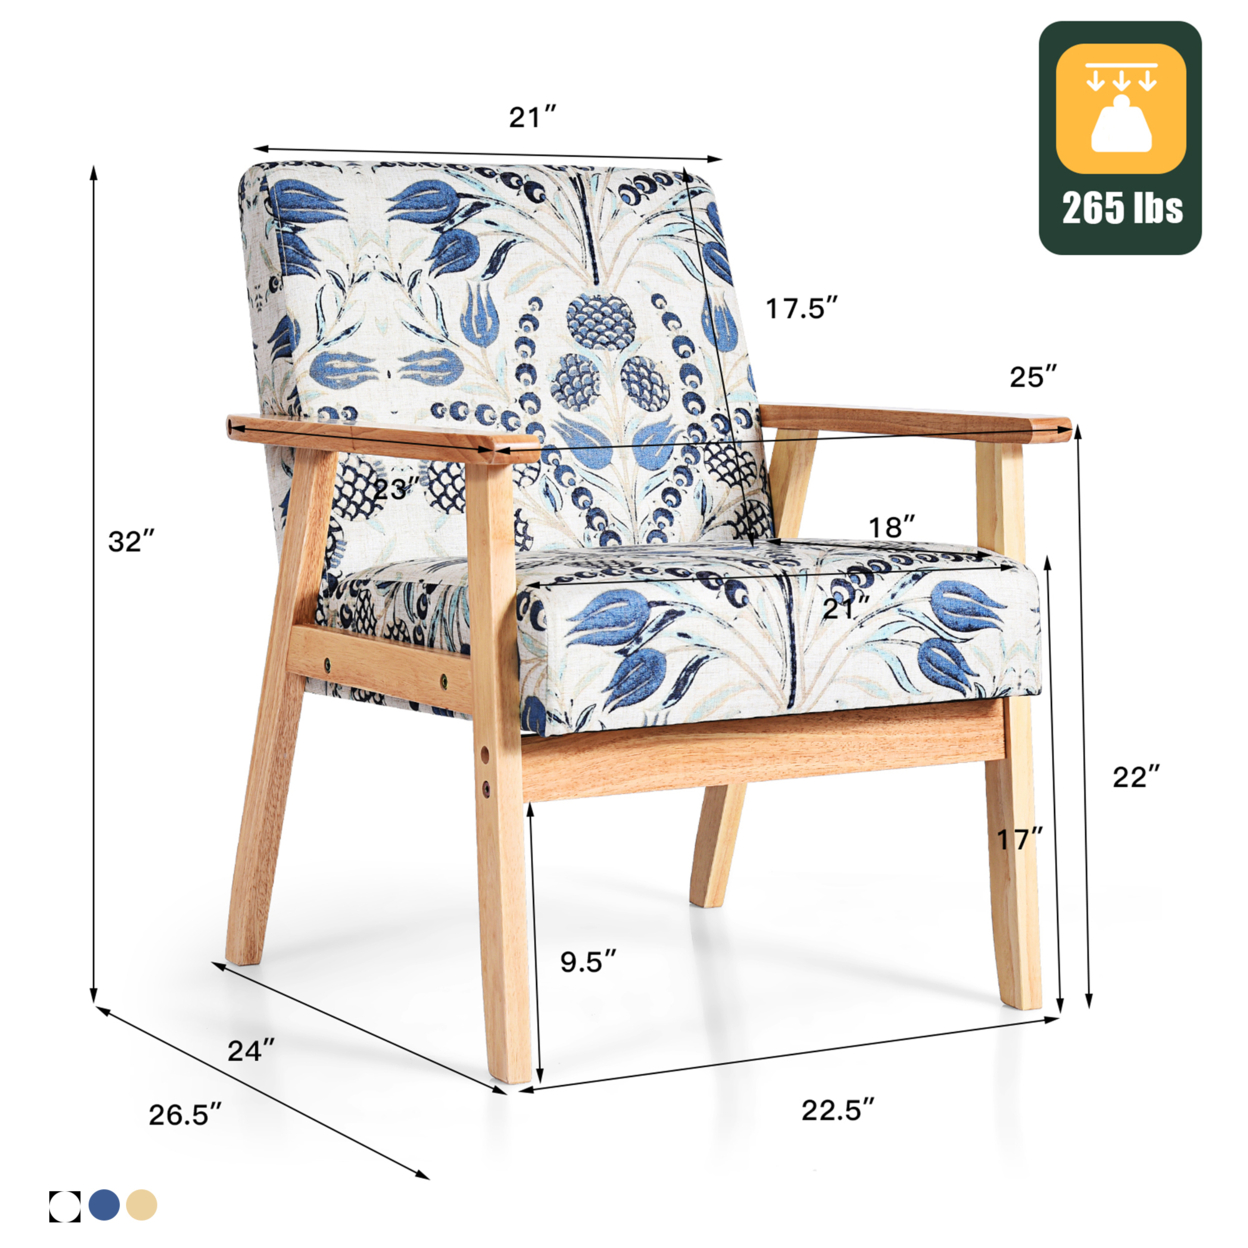 2PCS Accent Armchair Upholstered Chair Home Office W/ Wooden Frame White/Blue/Yellow - White